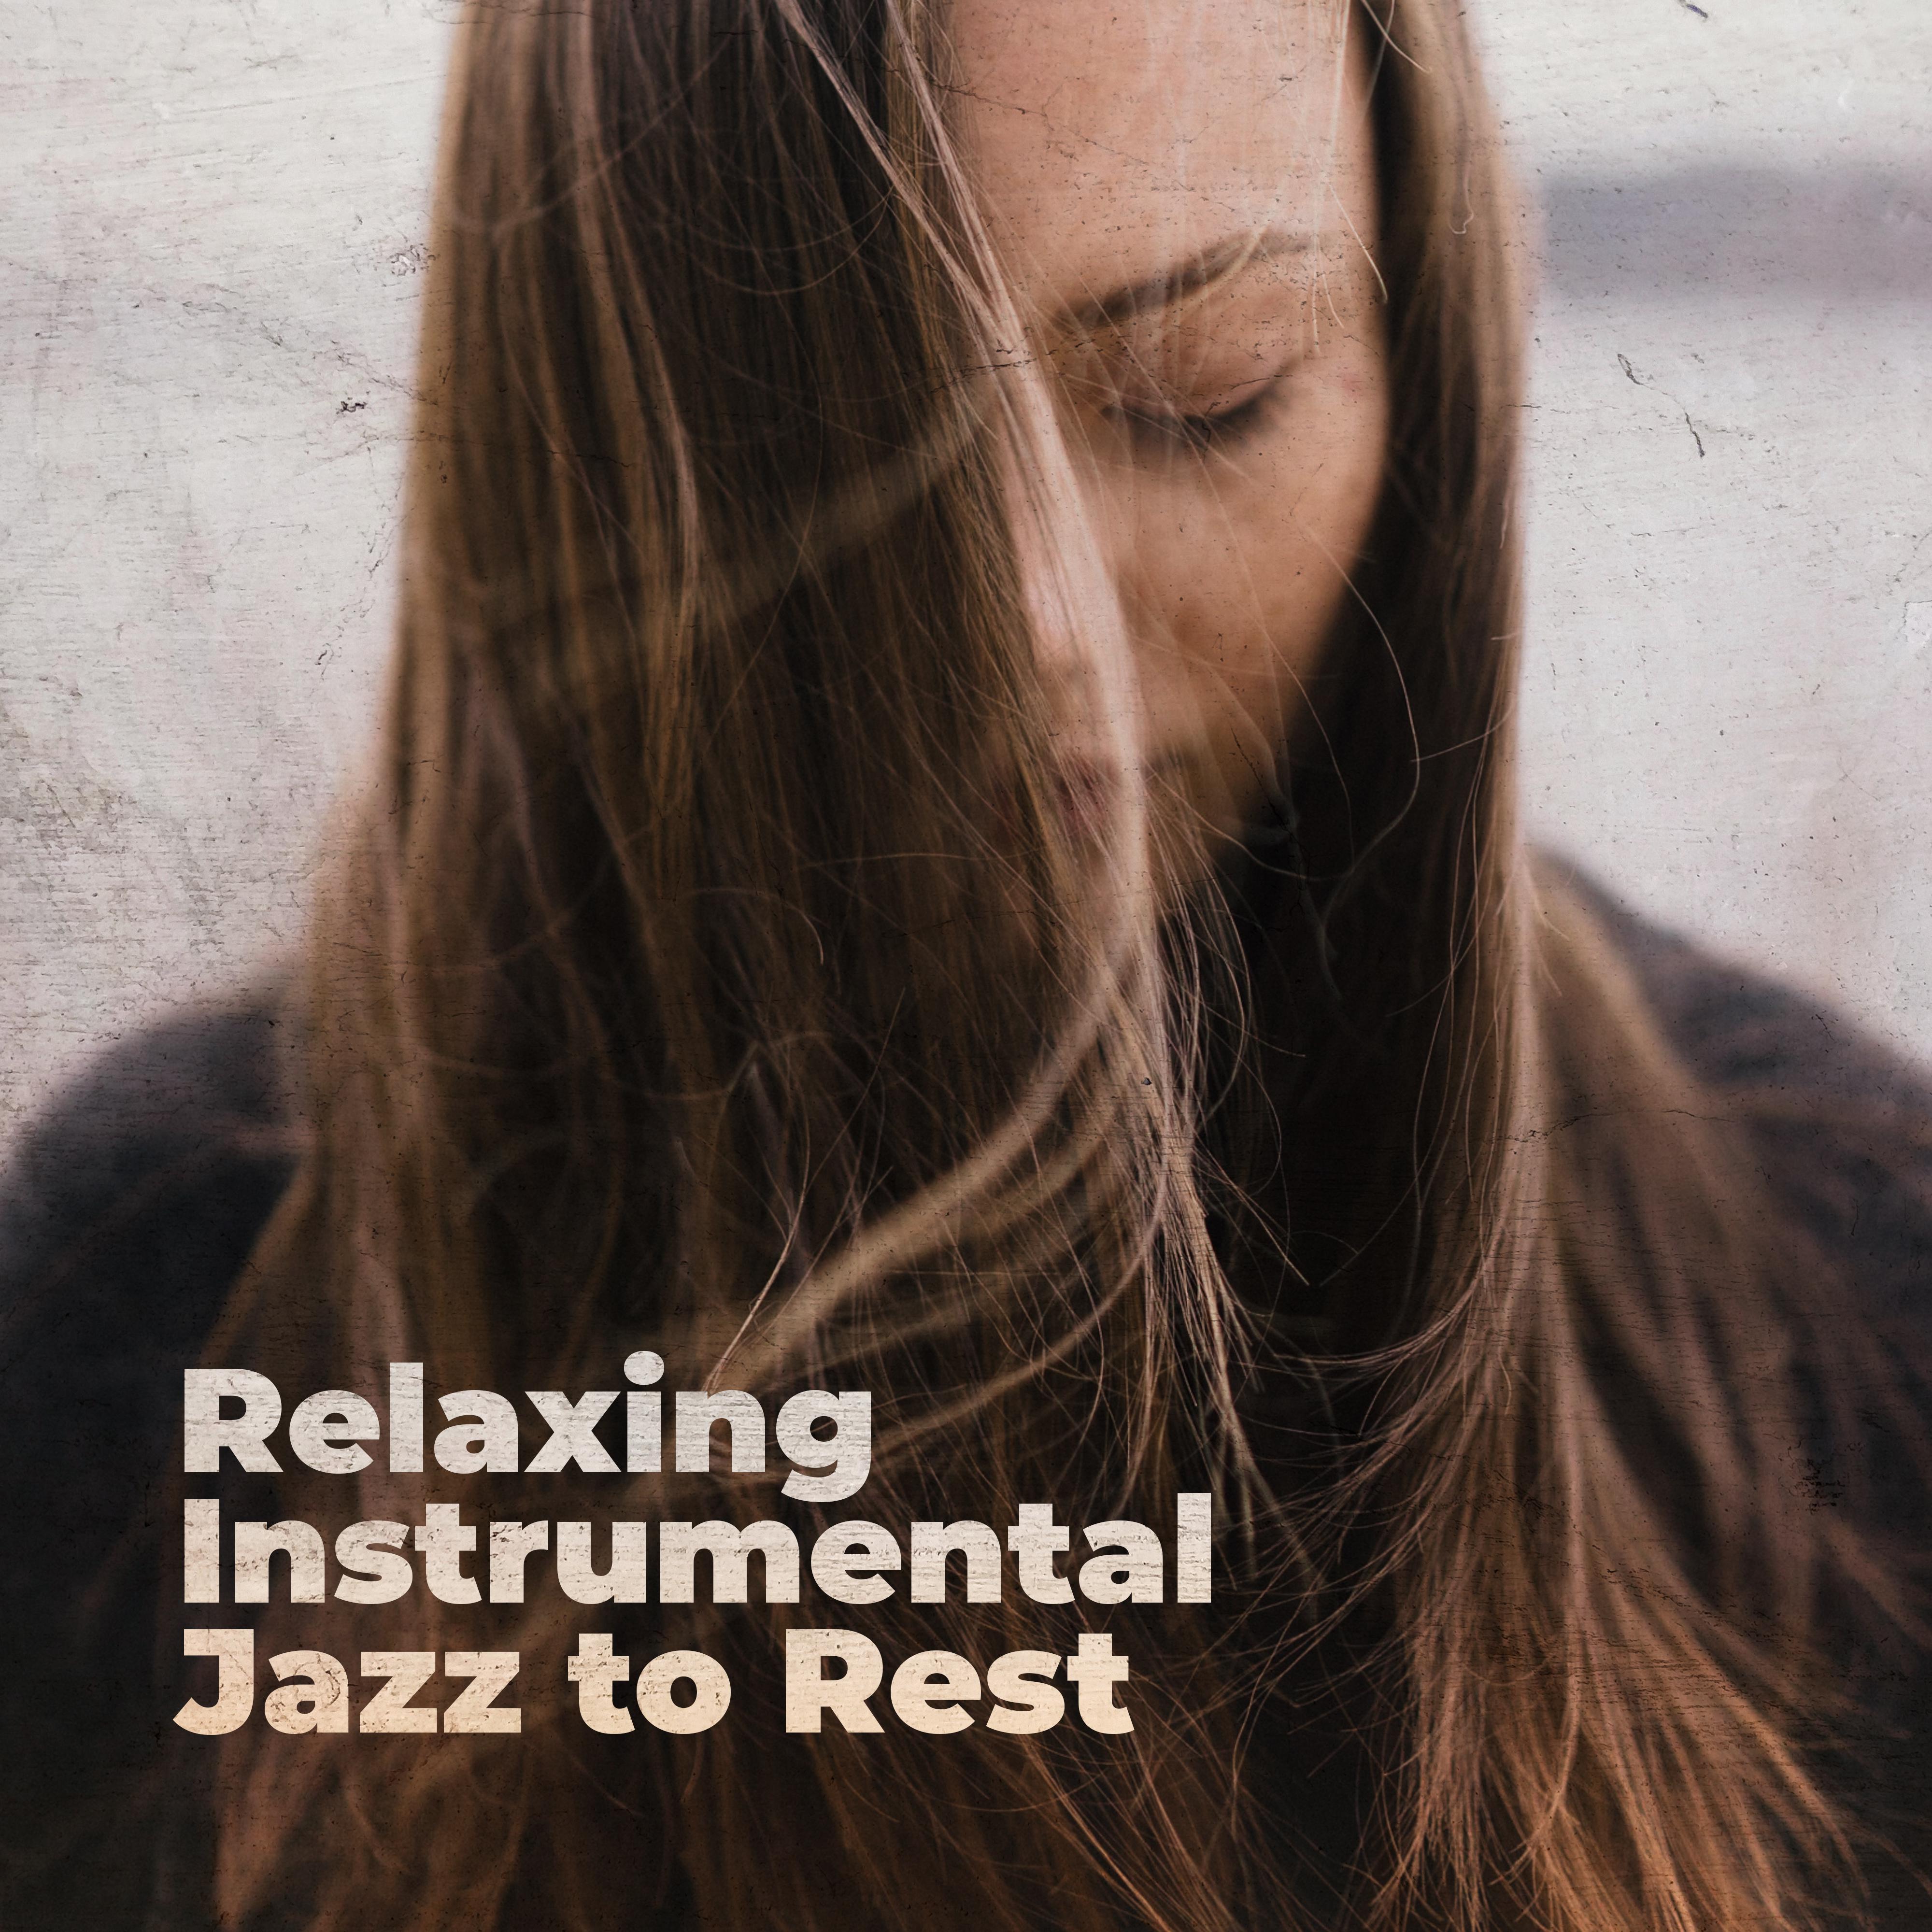 Relaxing Instrumental Jazz to Rest